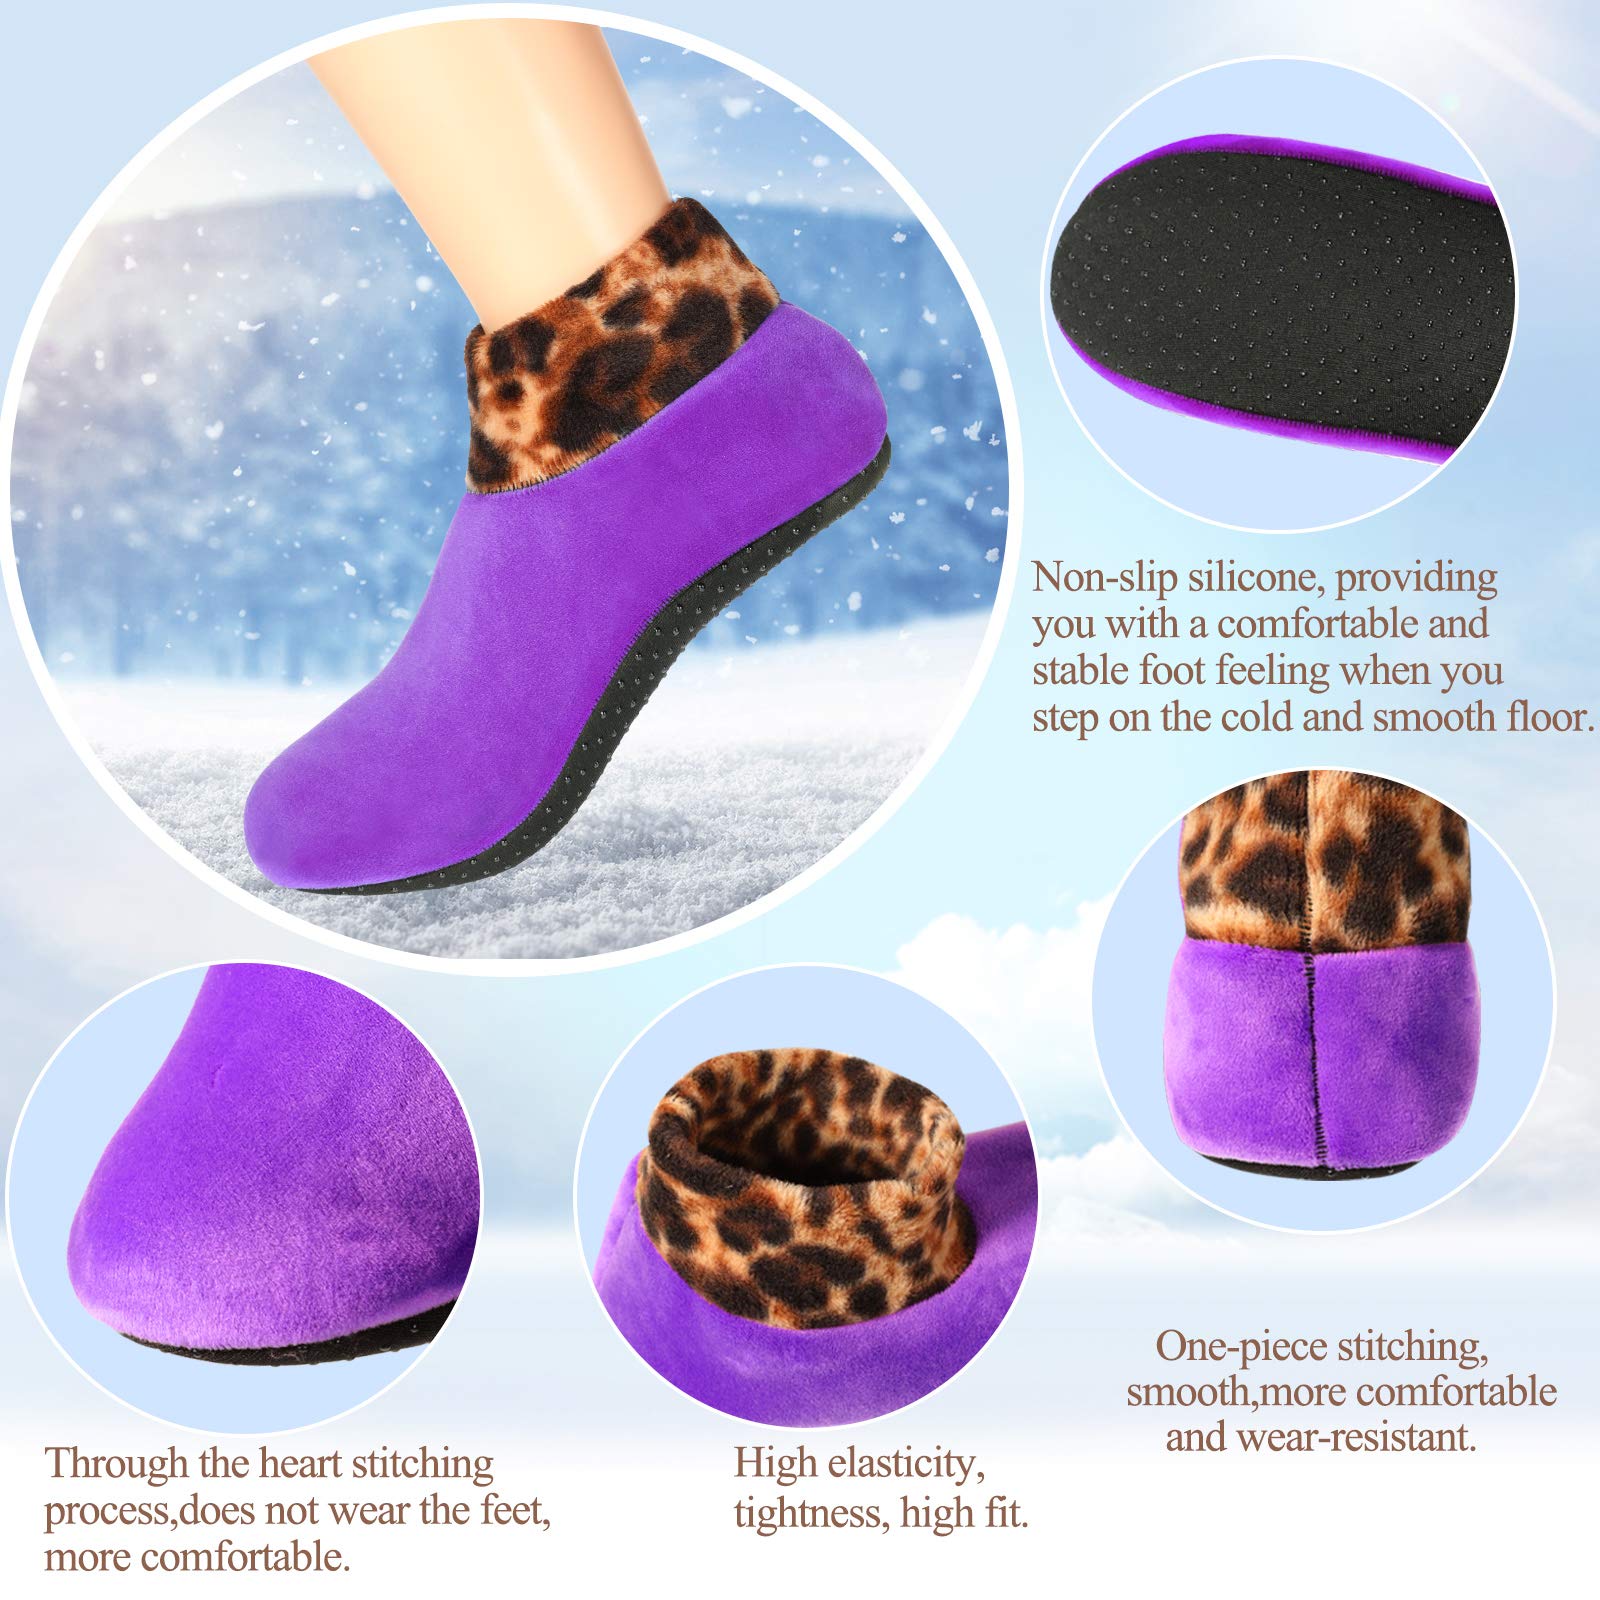 (⚡⚡Last Day Promotion-SAVE 50% OFF) Women Indoor Non-slip Thermal Socks [Free Size] - Buy 6 Pairs Get 20% OFF!